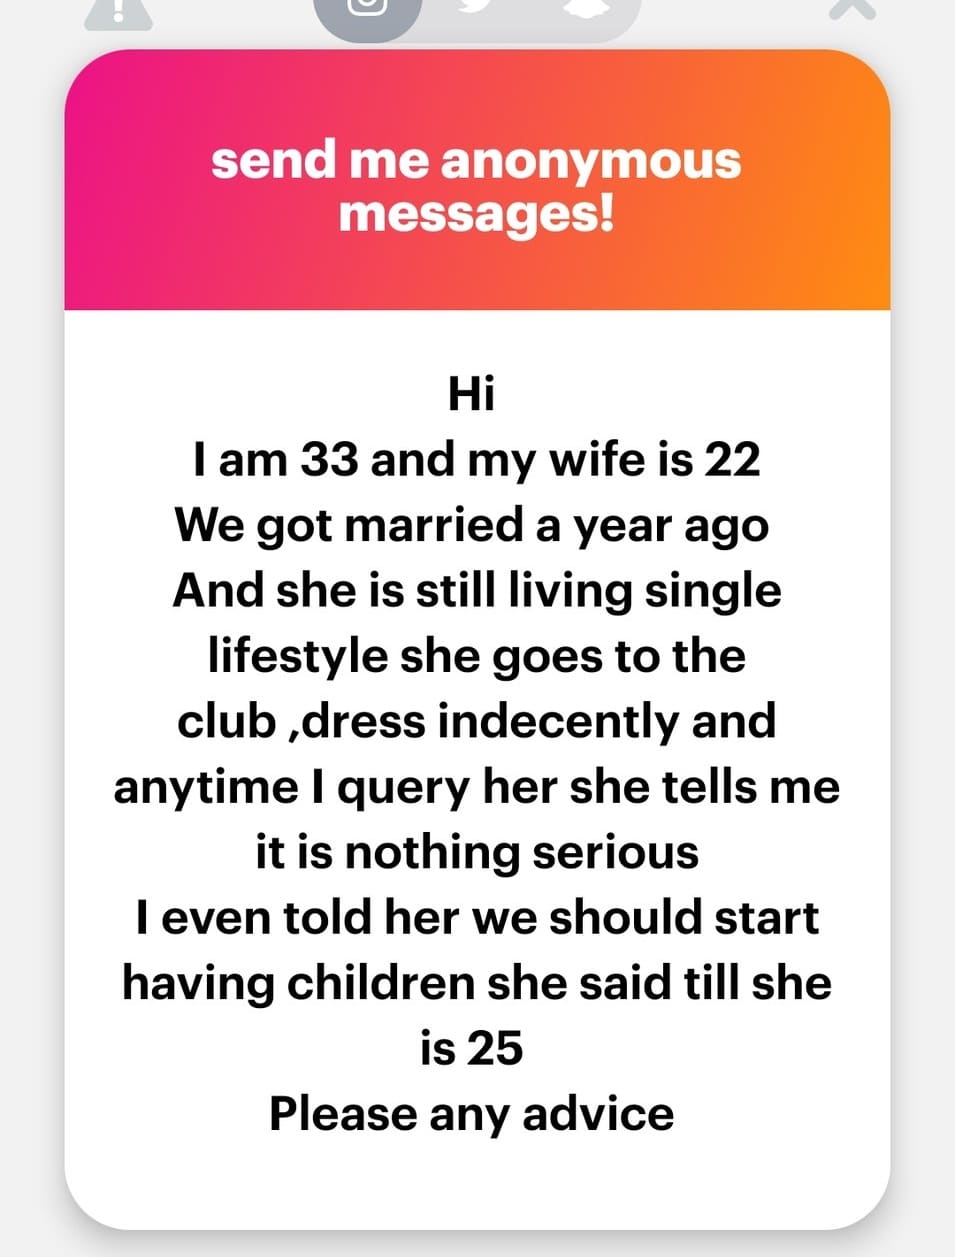 "She's still living single life" - 33-yr-old man seeks advice as 22-yr-old wife refuse to get pregnant